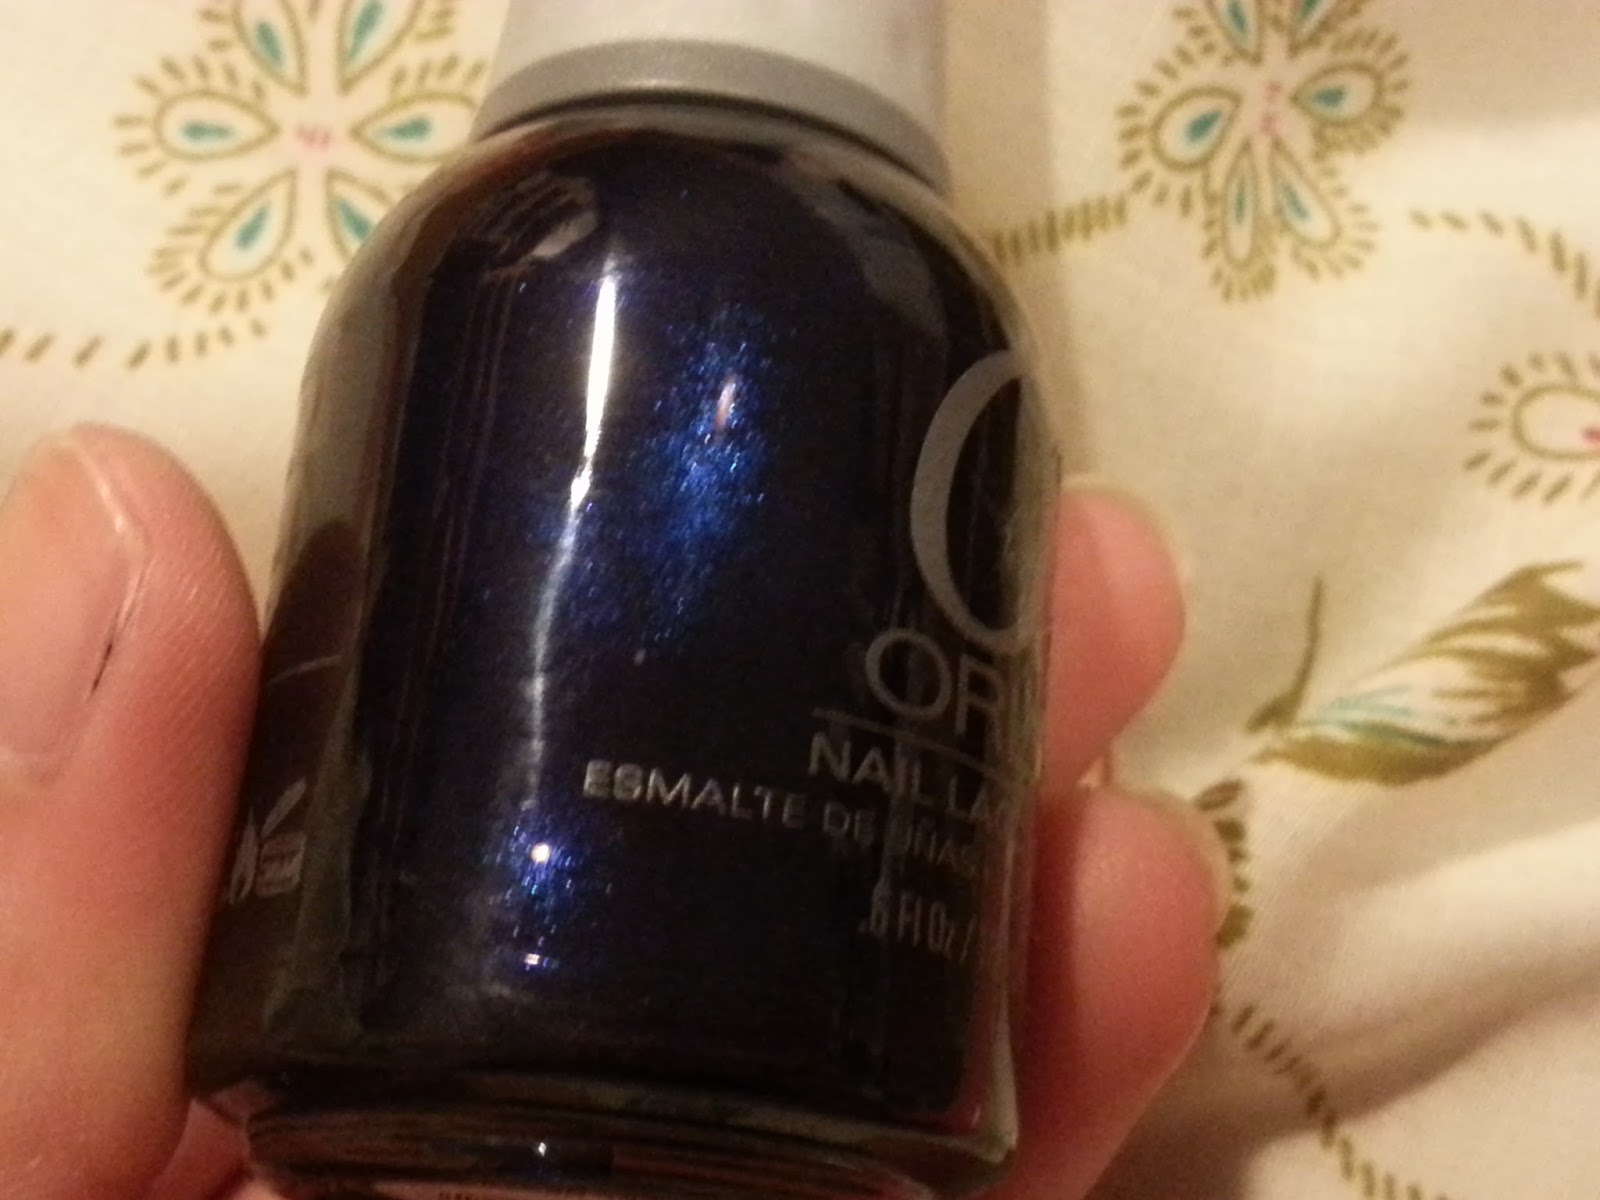 9. Orly Nail Lacquer in "Royal Navy" - wide 4